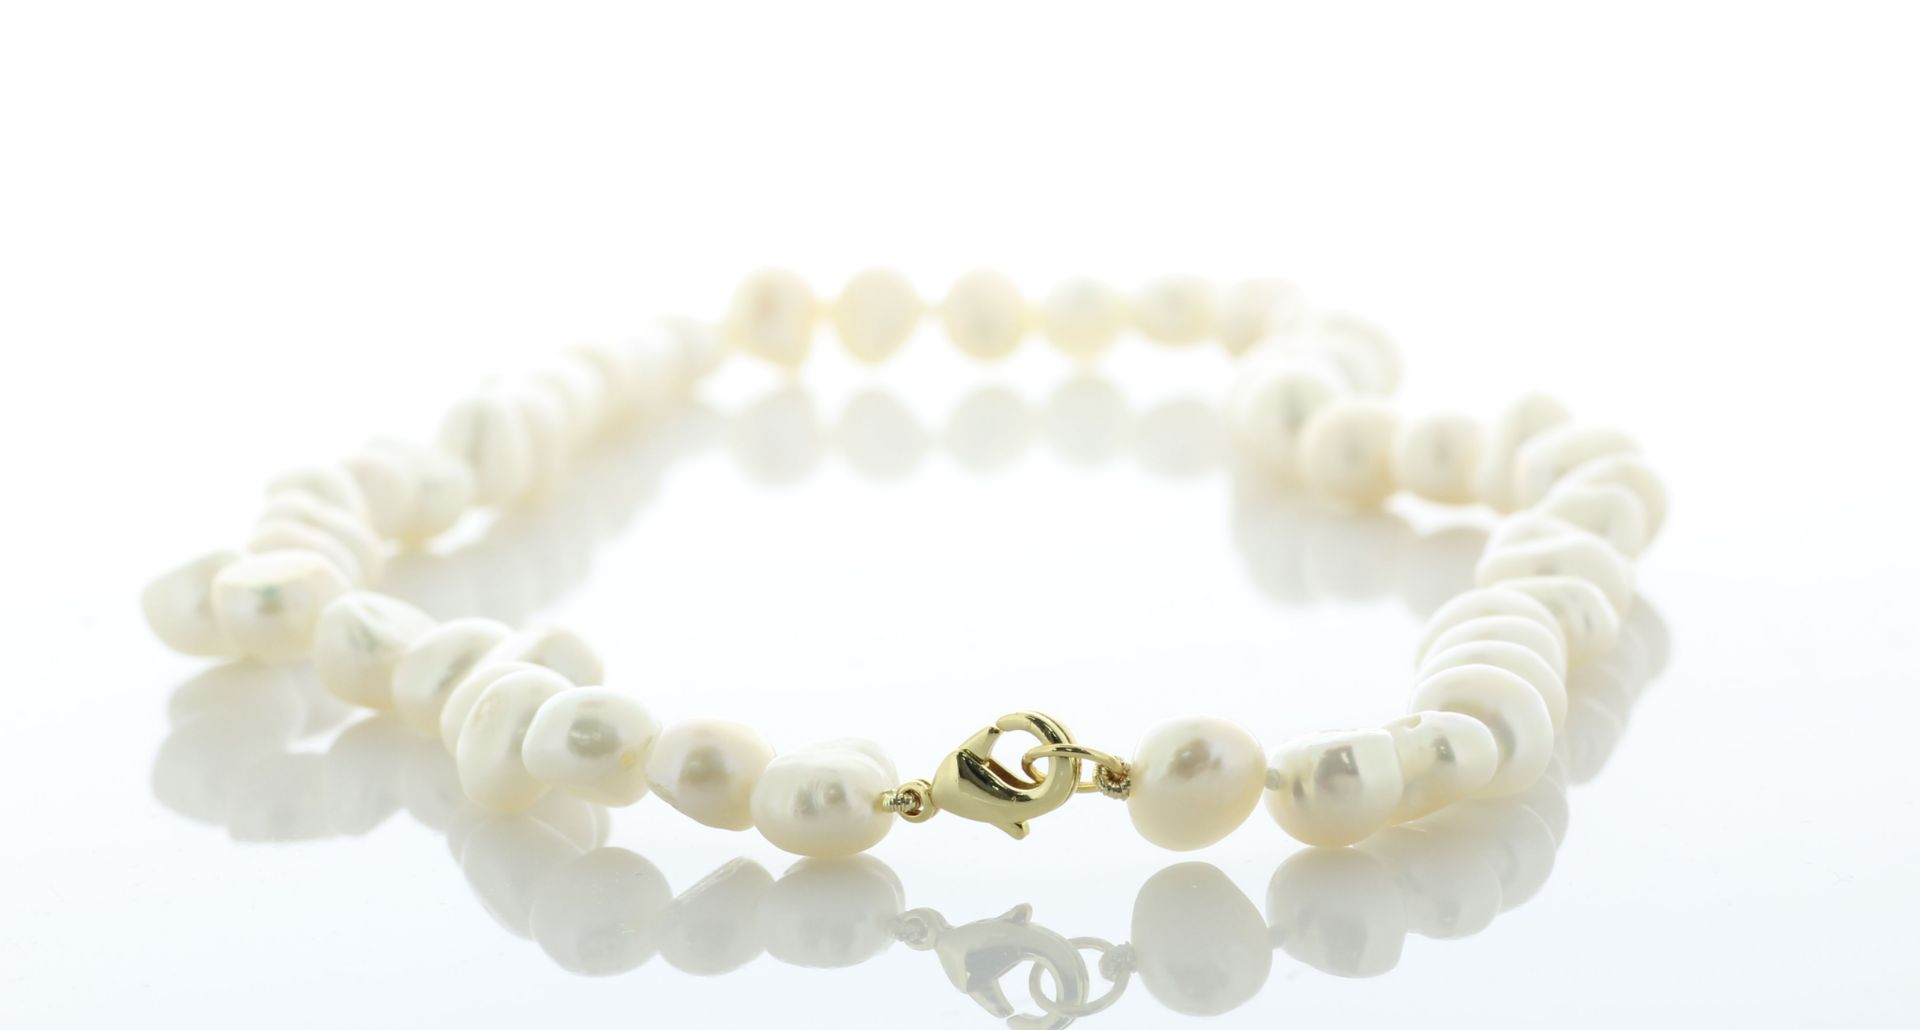 18 Inch Freshwater Cultured 8.0 - 8.5mm Pearl Necklace With Gold Plated Clasp - Valued By AGI £280. - Image 2 of 4